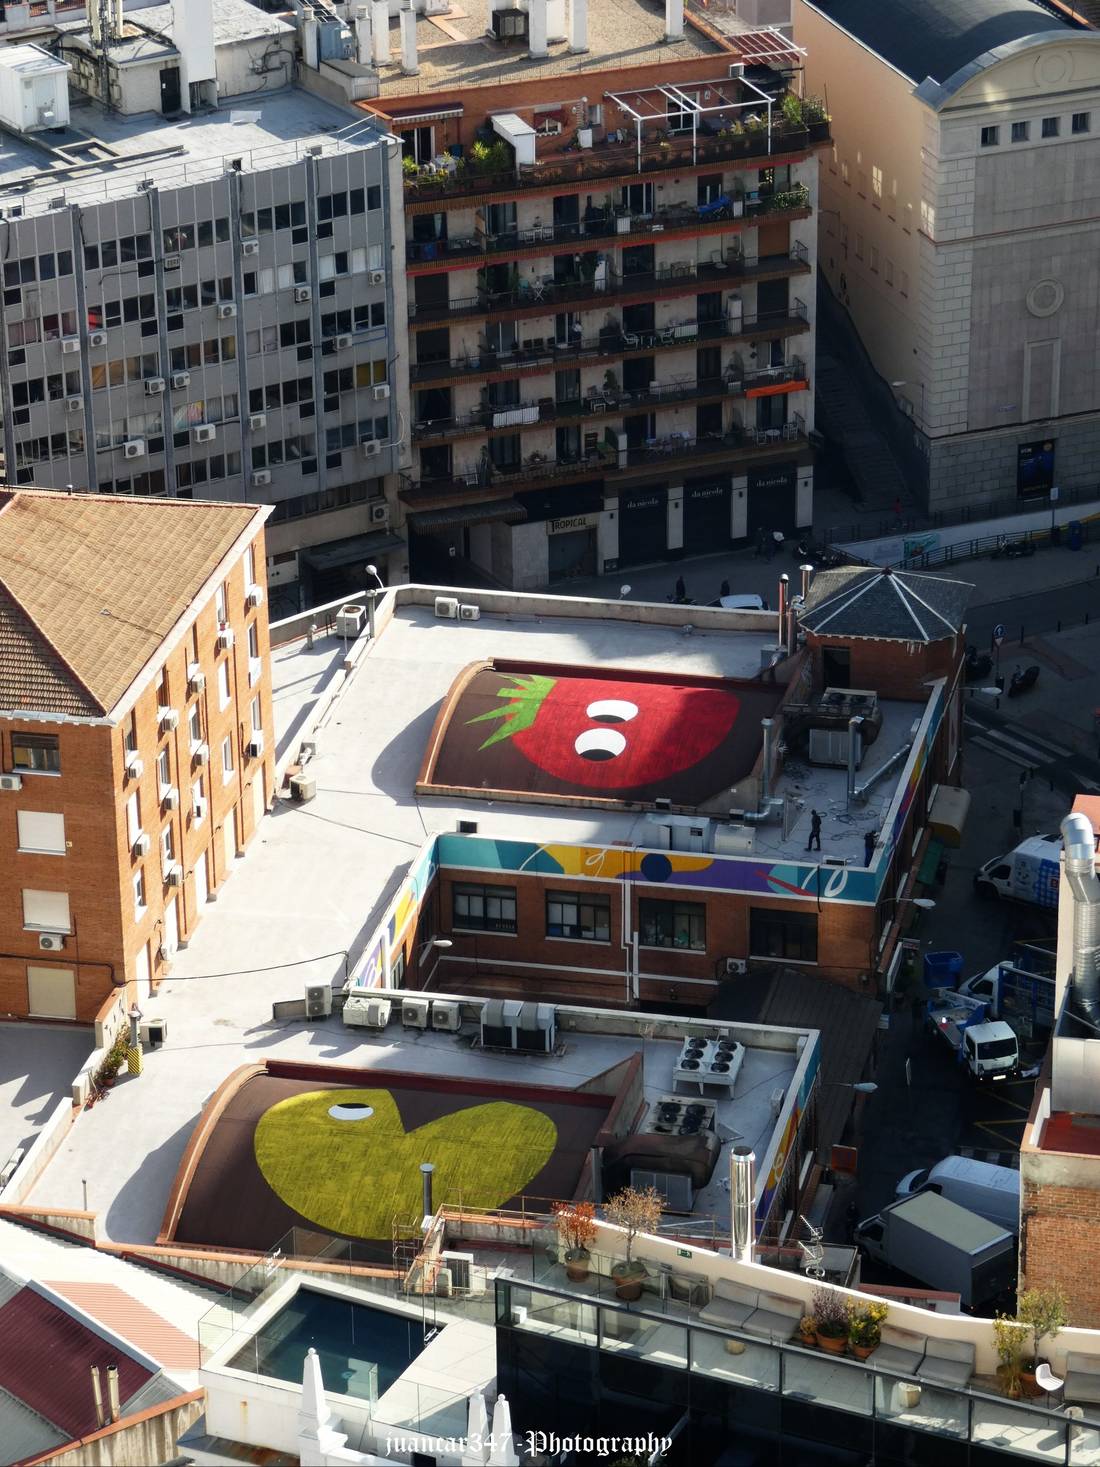 Curiosities of the Madrid rooftops